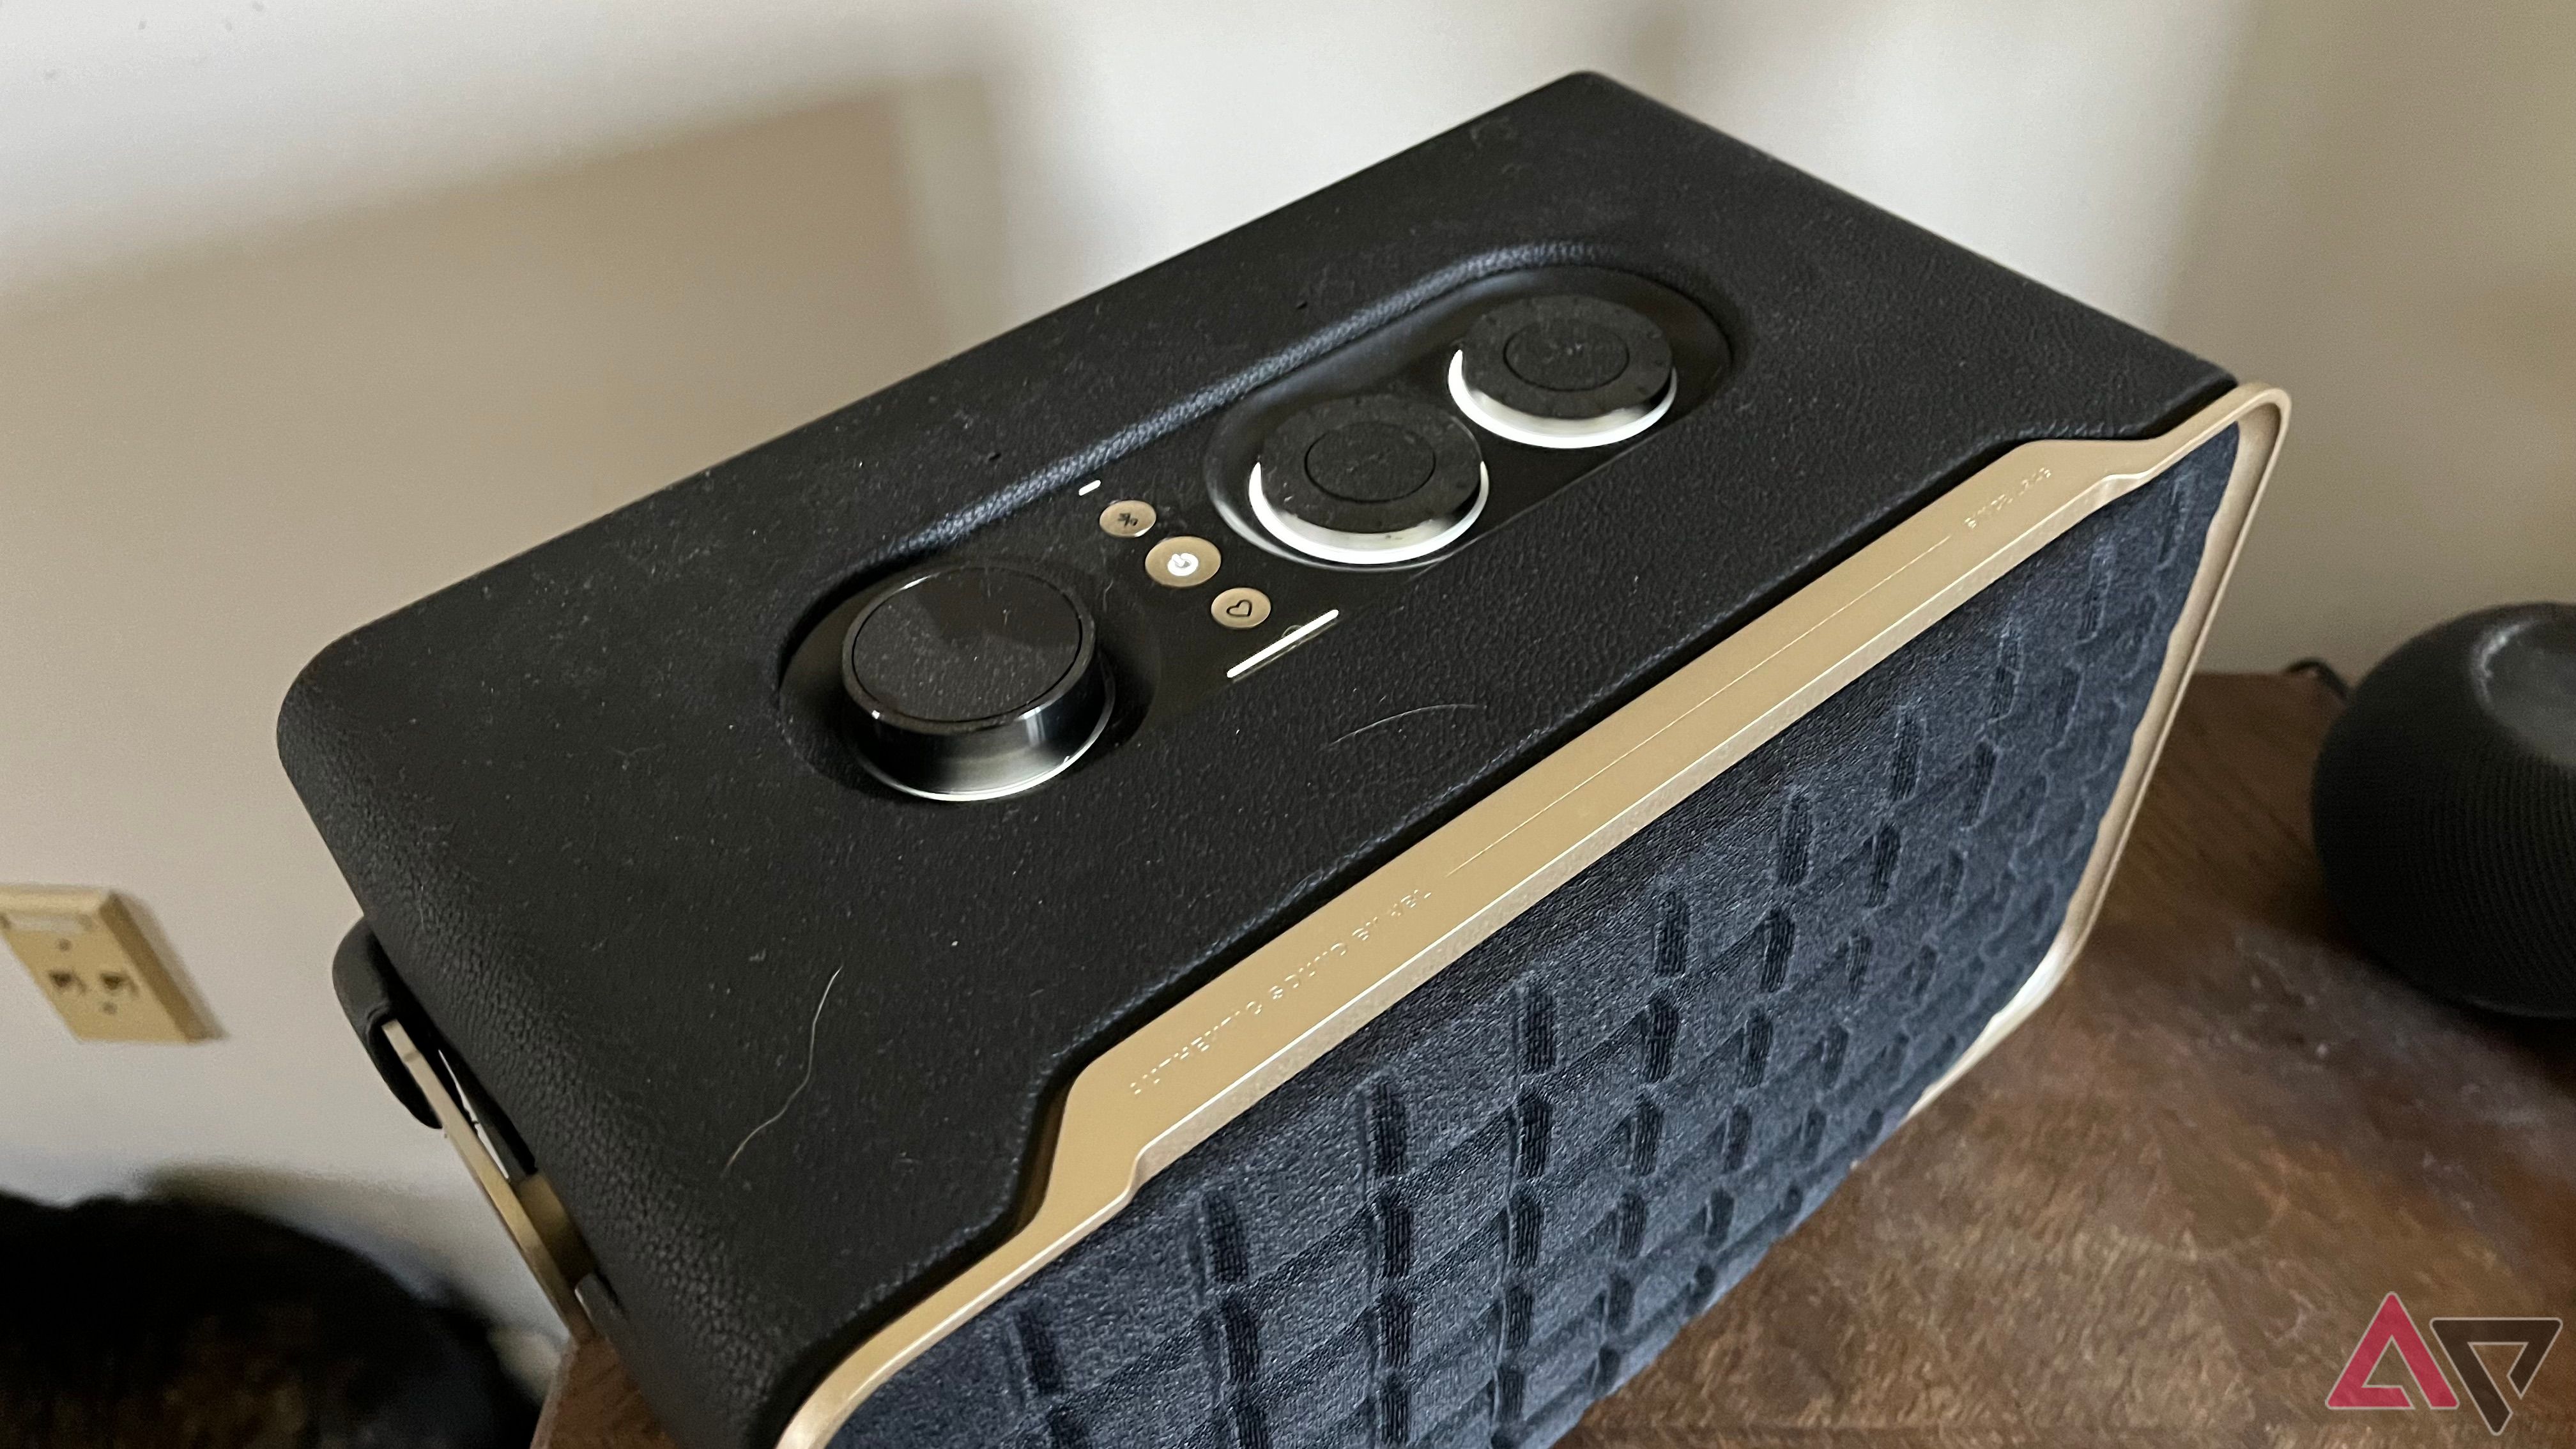 JBL Authentics 300 portable speaker review: Large sound in a large package